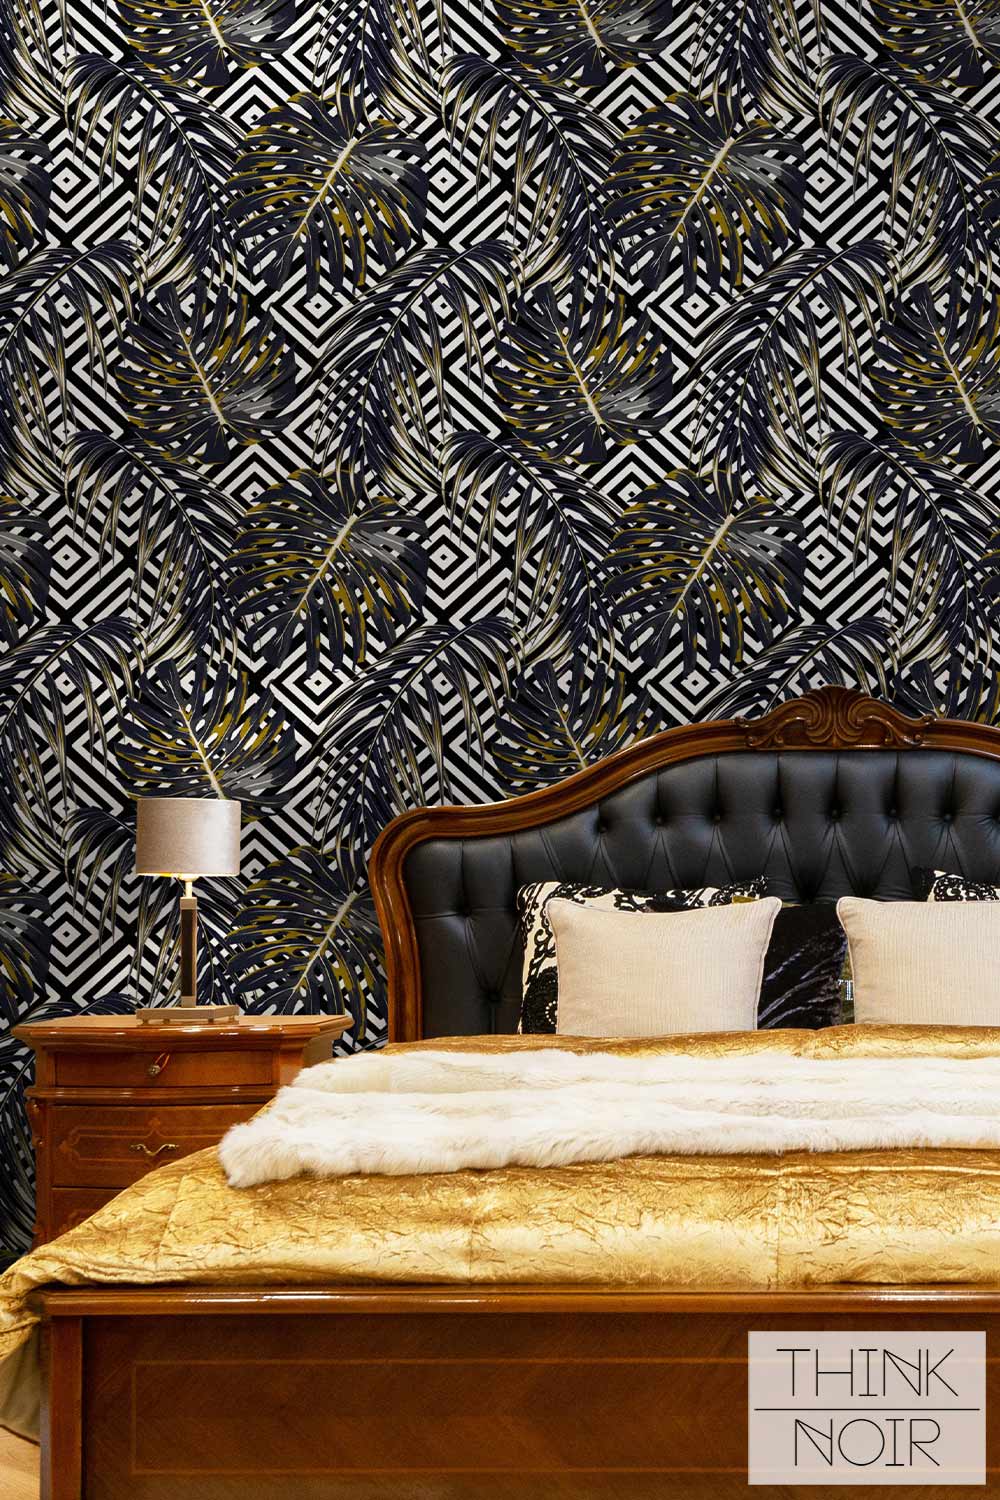 Black and White Edgy Art Deco Wallpaper